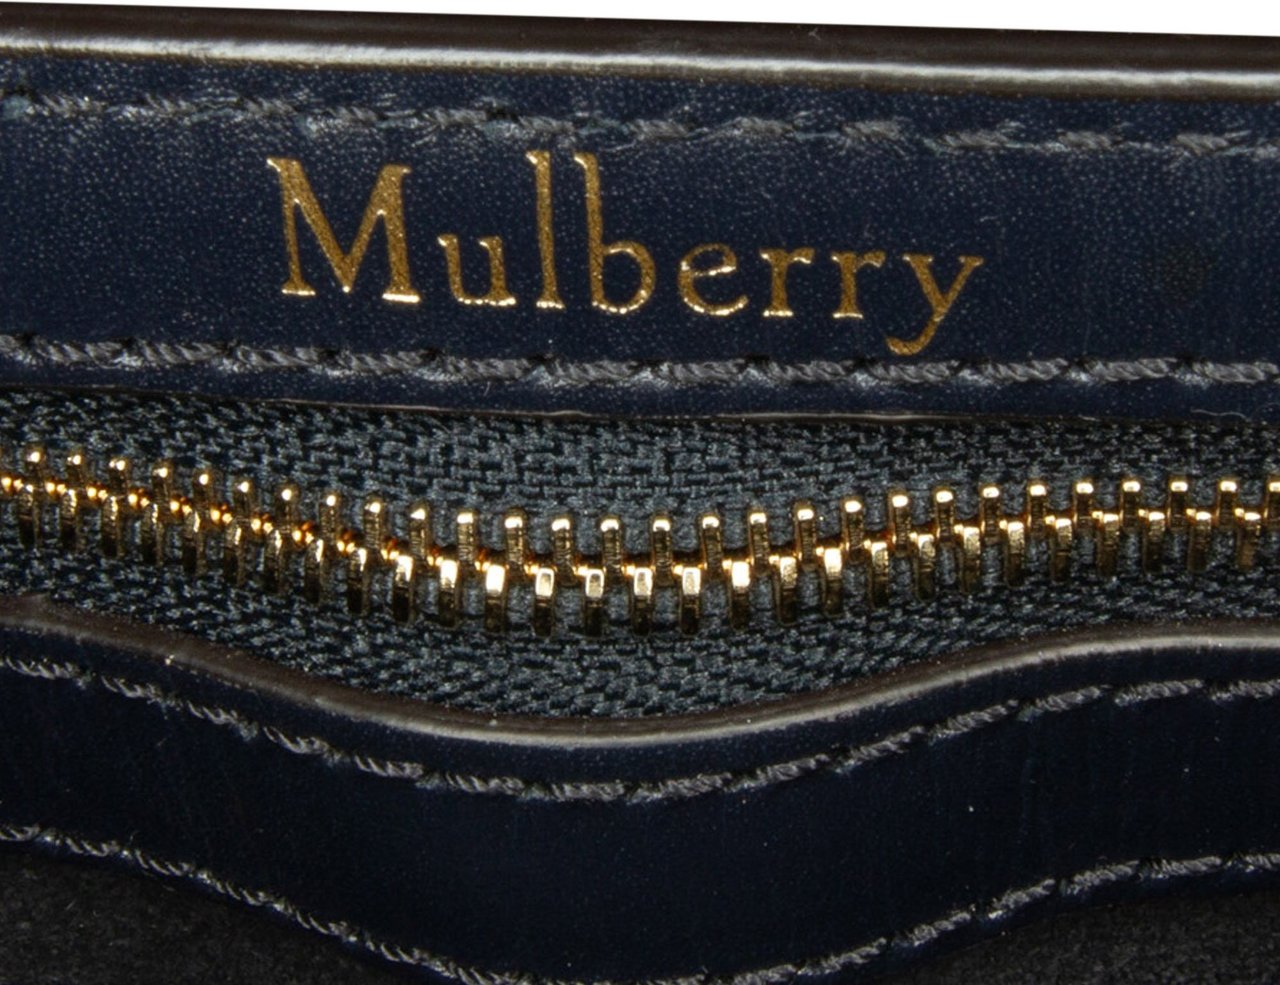 Mulberry Bayswater Tricolor Satchel Blauw